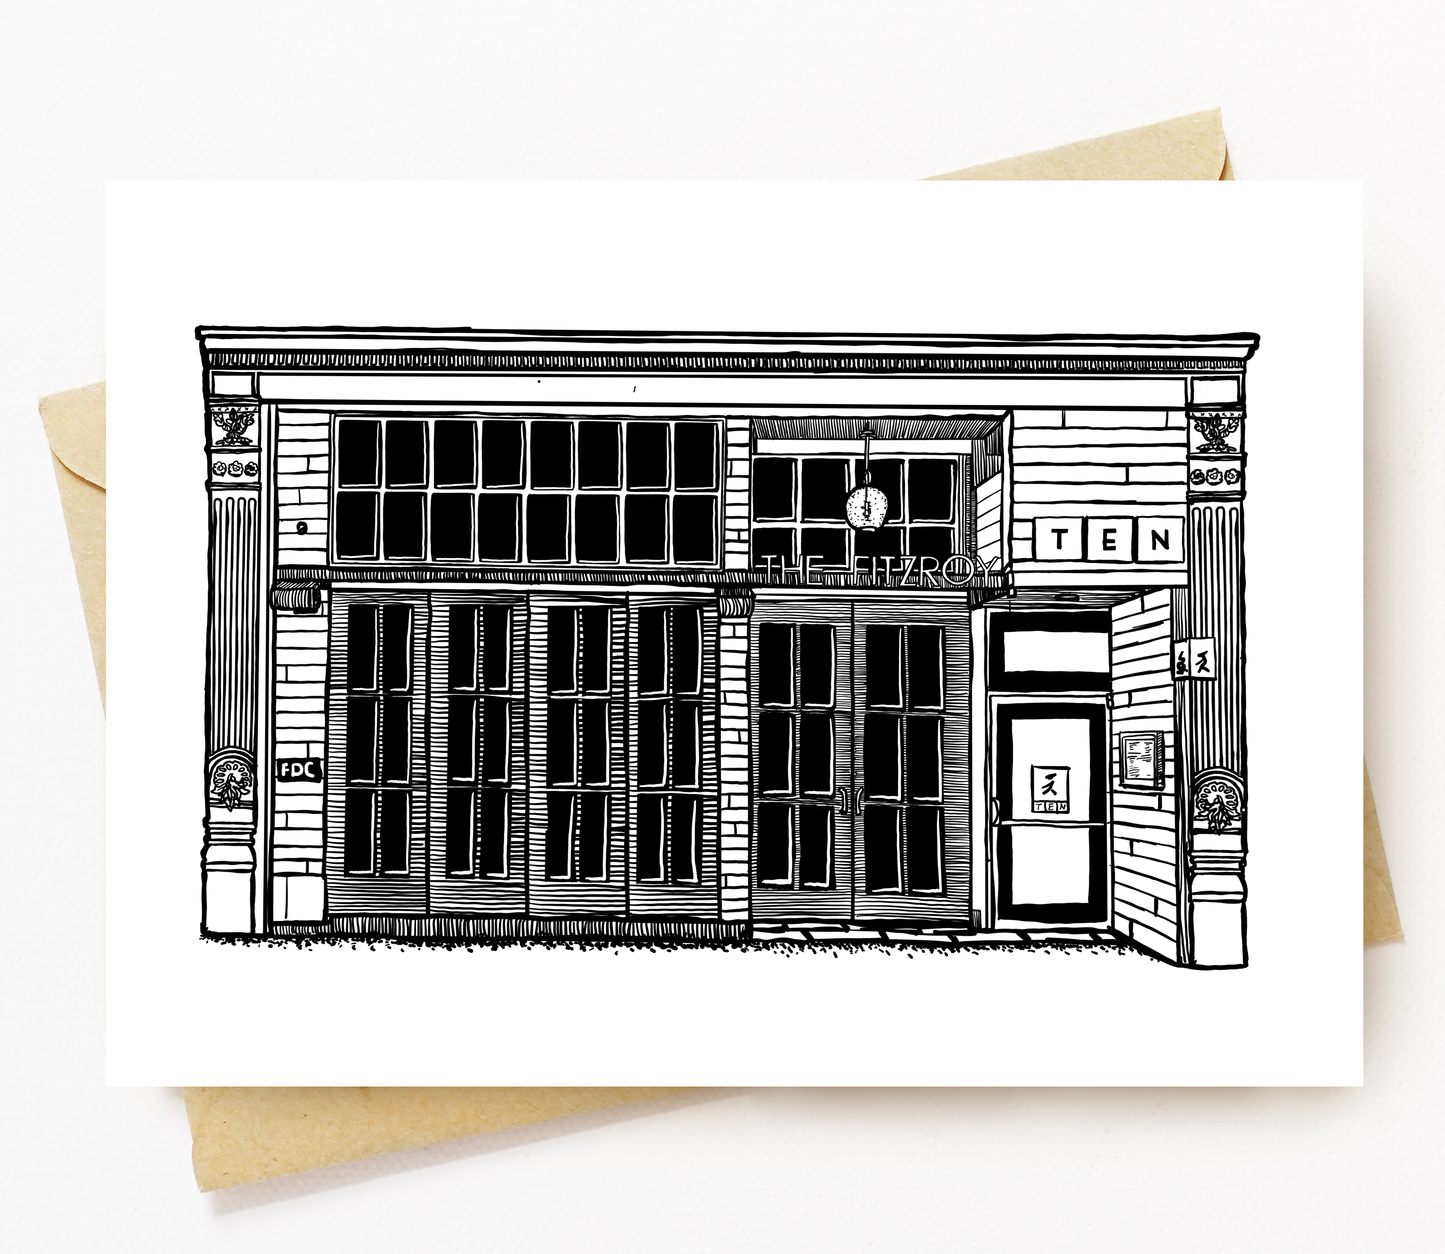 BellavanceInk: Greeting Card of the Charlottesville Area Bar/Restaurant The Fitzroy On The Downtown Mall